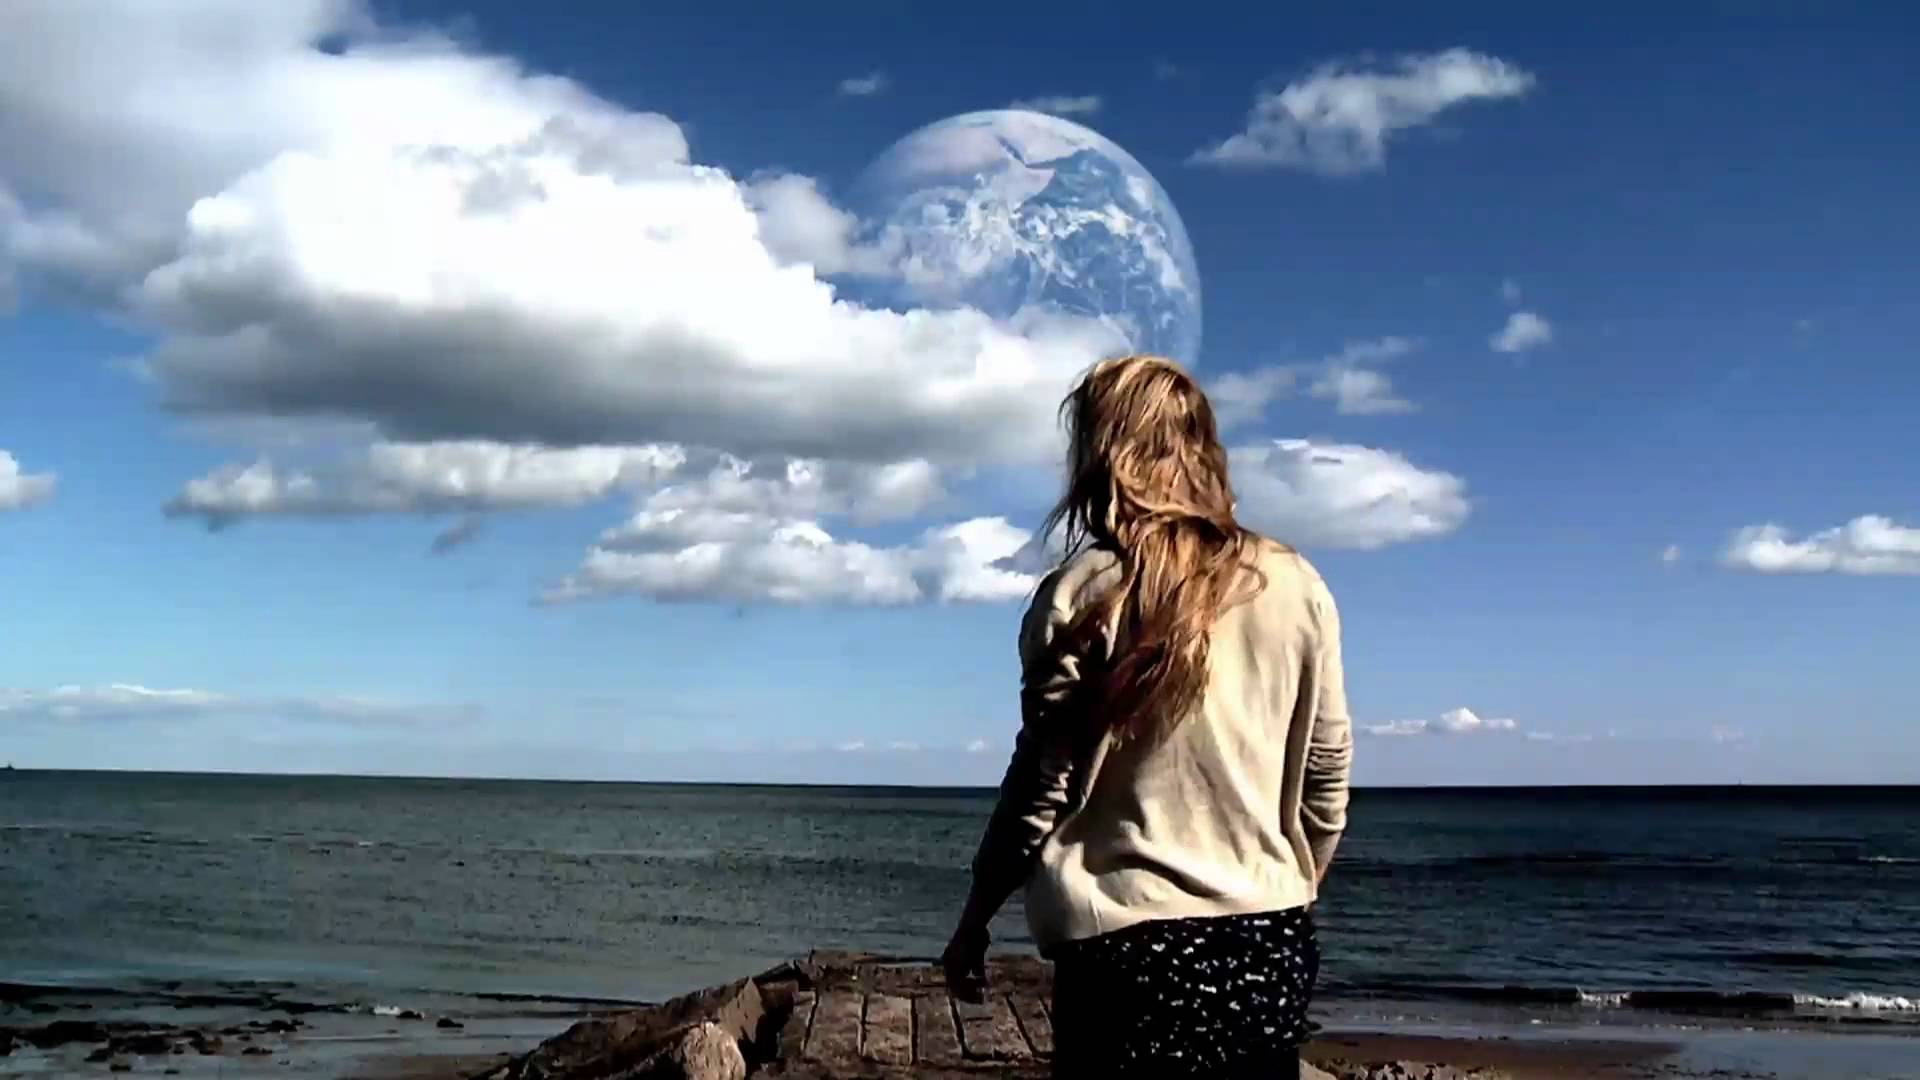 A still from the movie Another Earth in which the main character played by Britt Marling looks out over the sea to see Another Earth